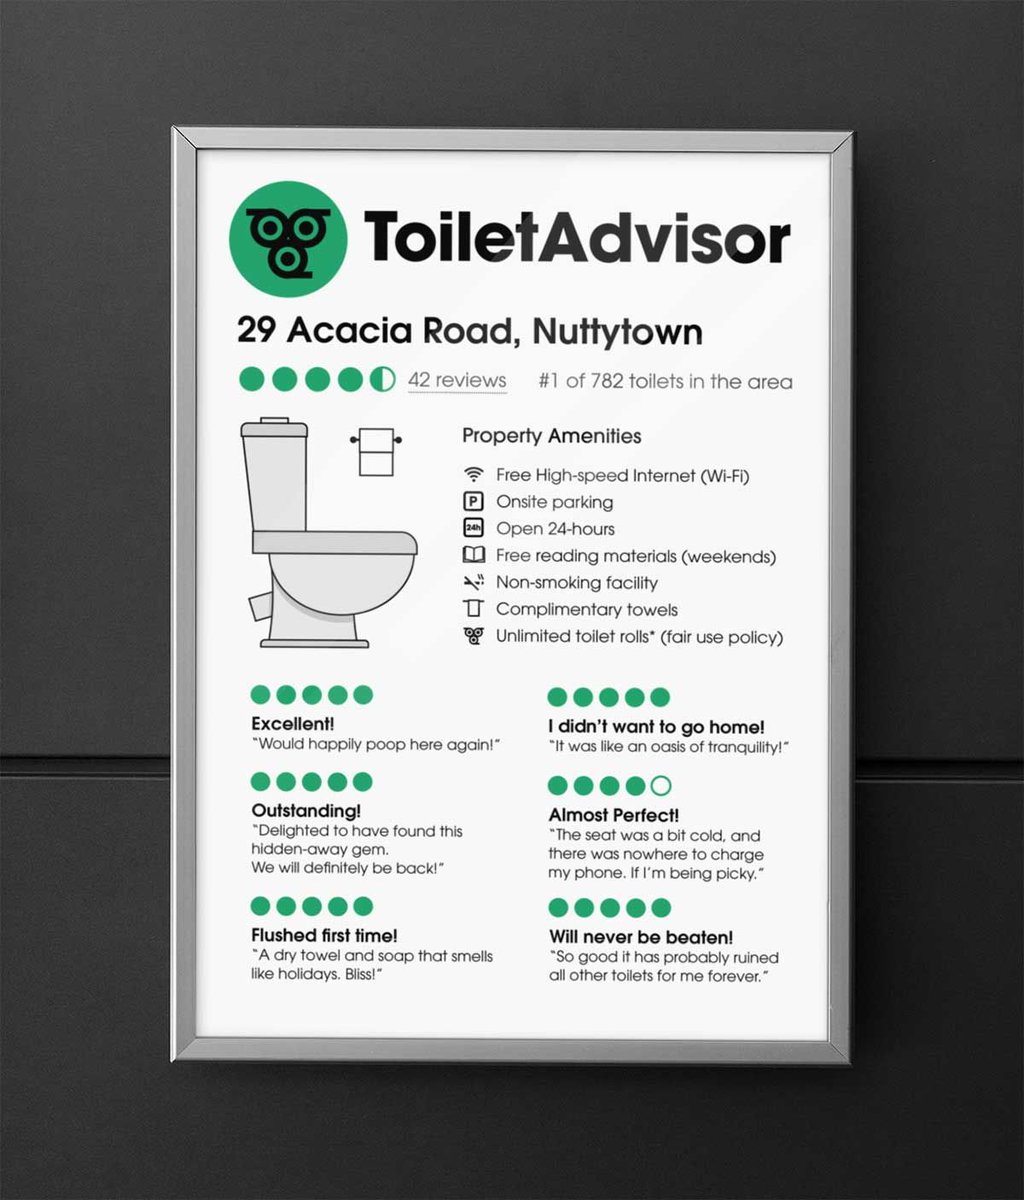 ToiletAdvisor - get a 5-star personalised review for the toilet of your dreams, whether it's your own, or the toilet of someone special - get yours HERE >>> buff.ly/3waOc7i